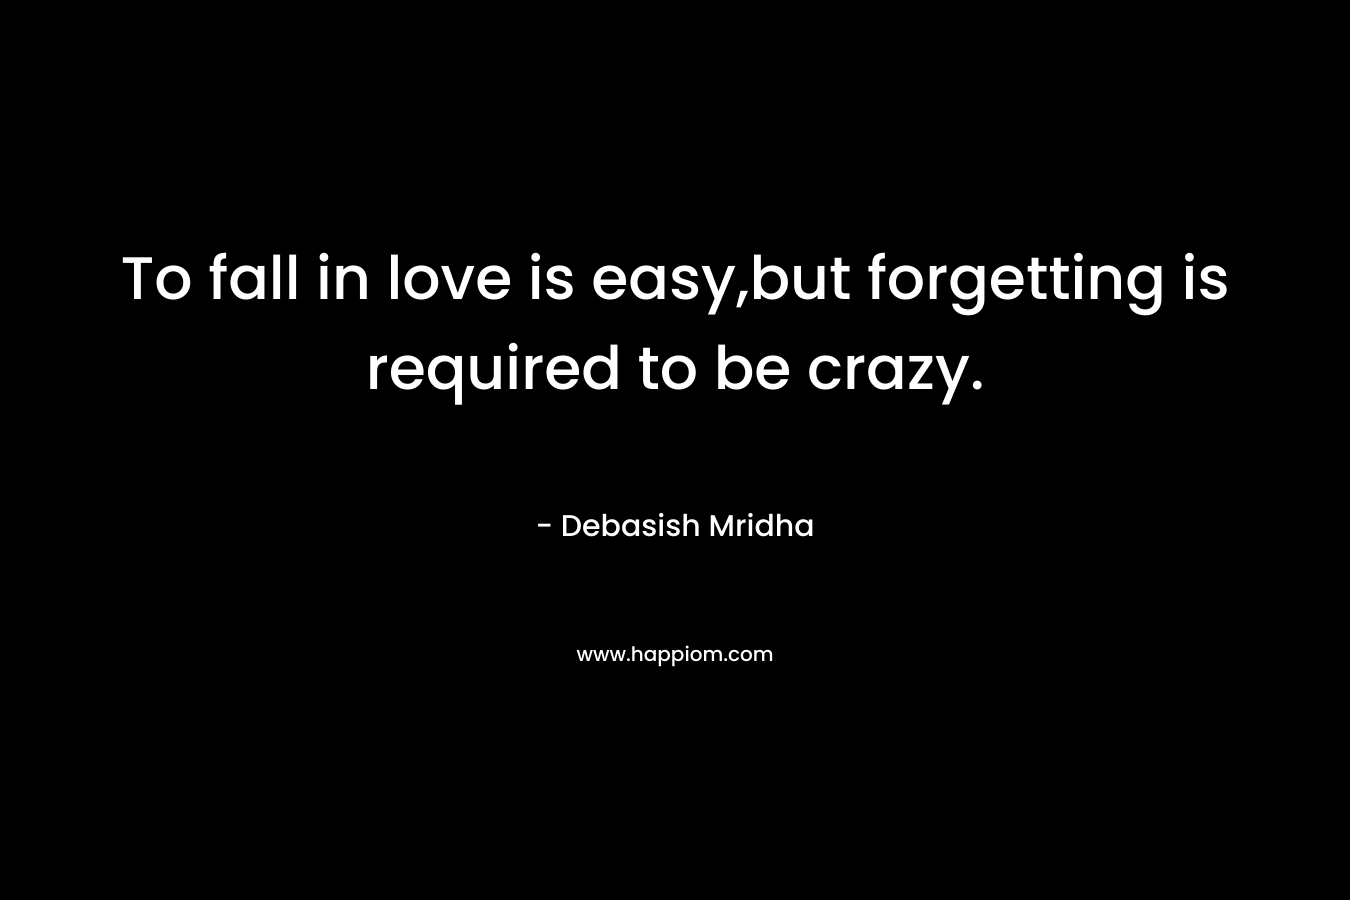 To fall in love is easy,but forgetting is required to be crazy.